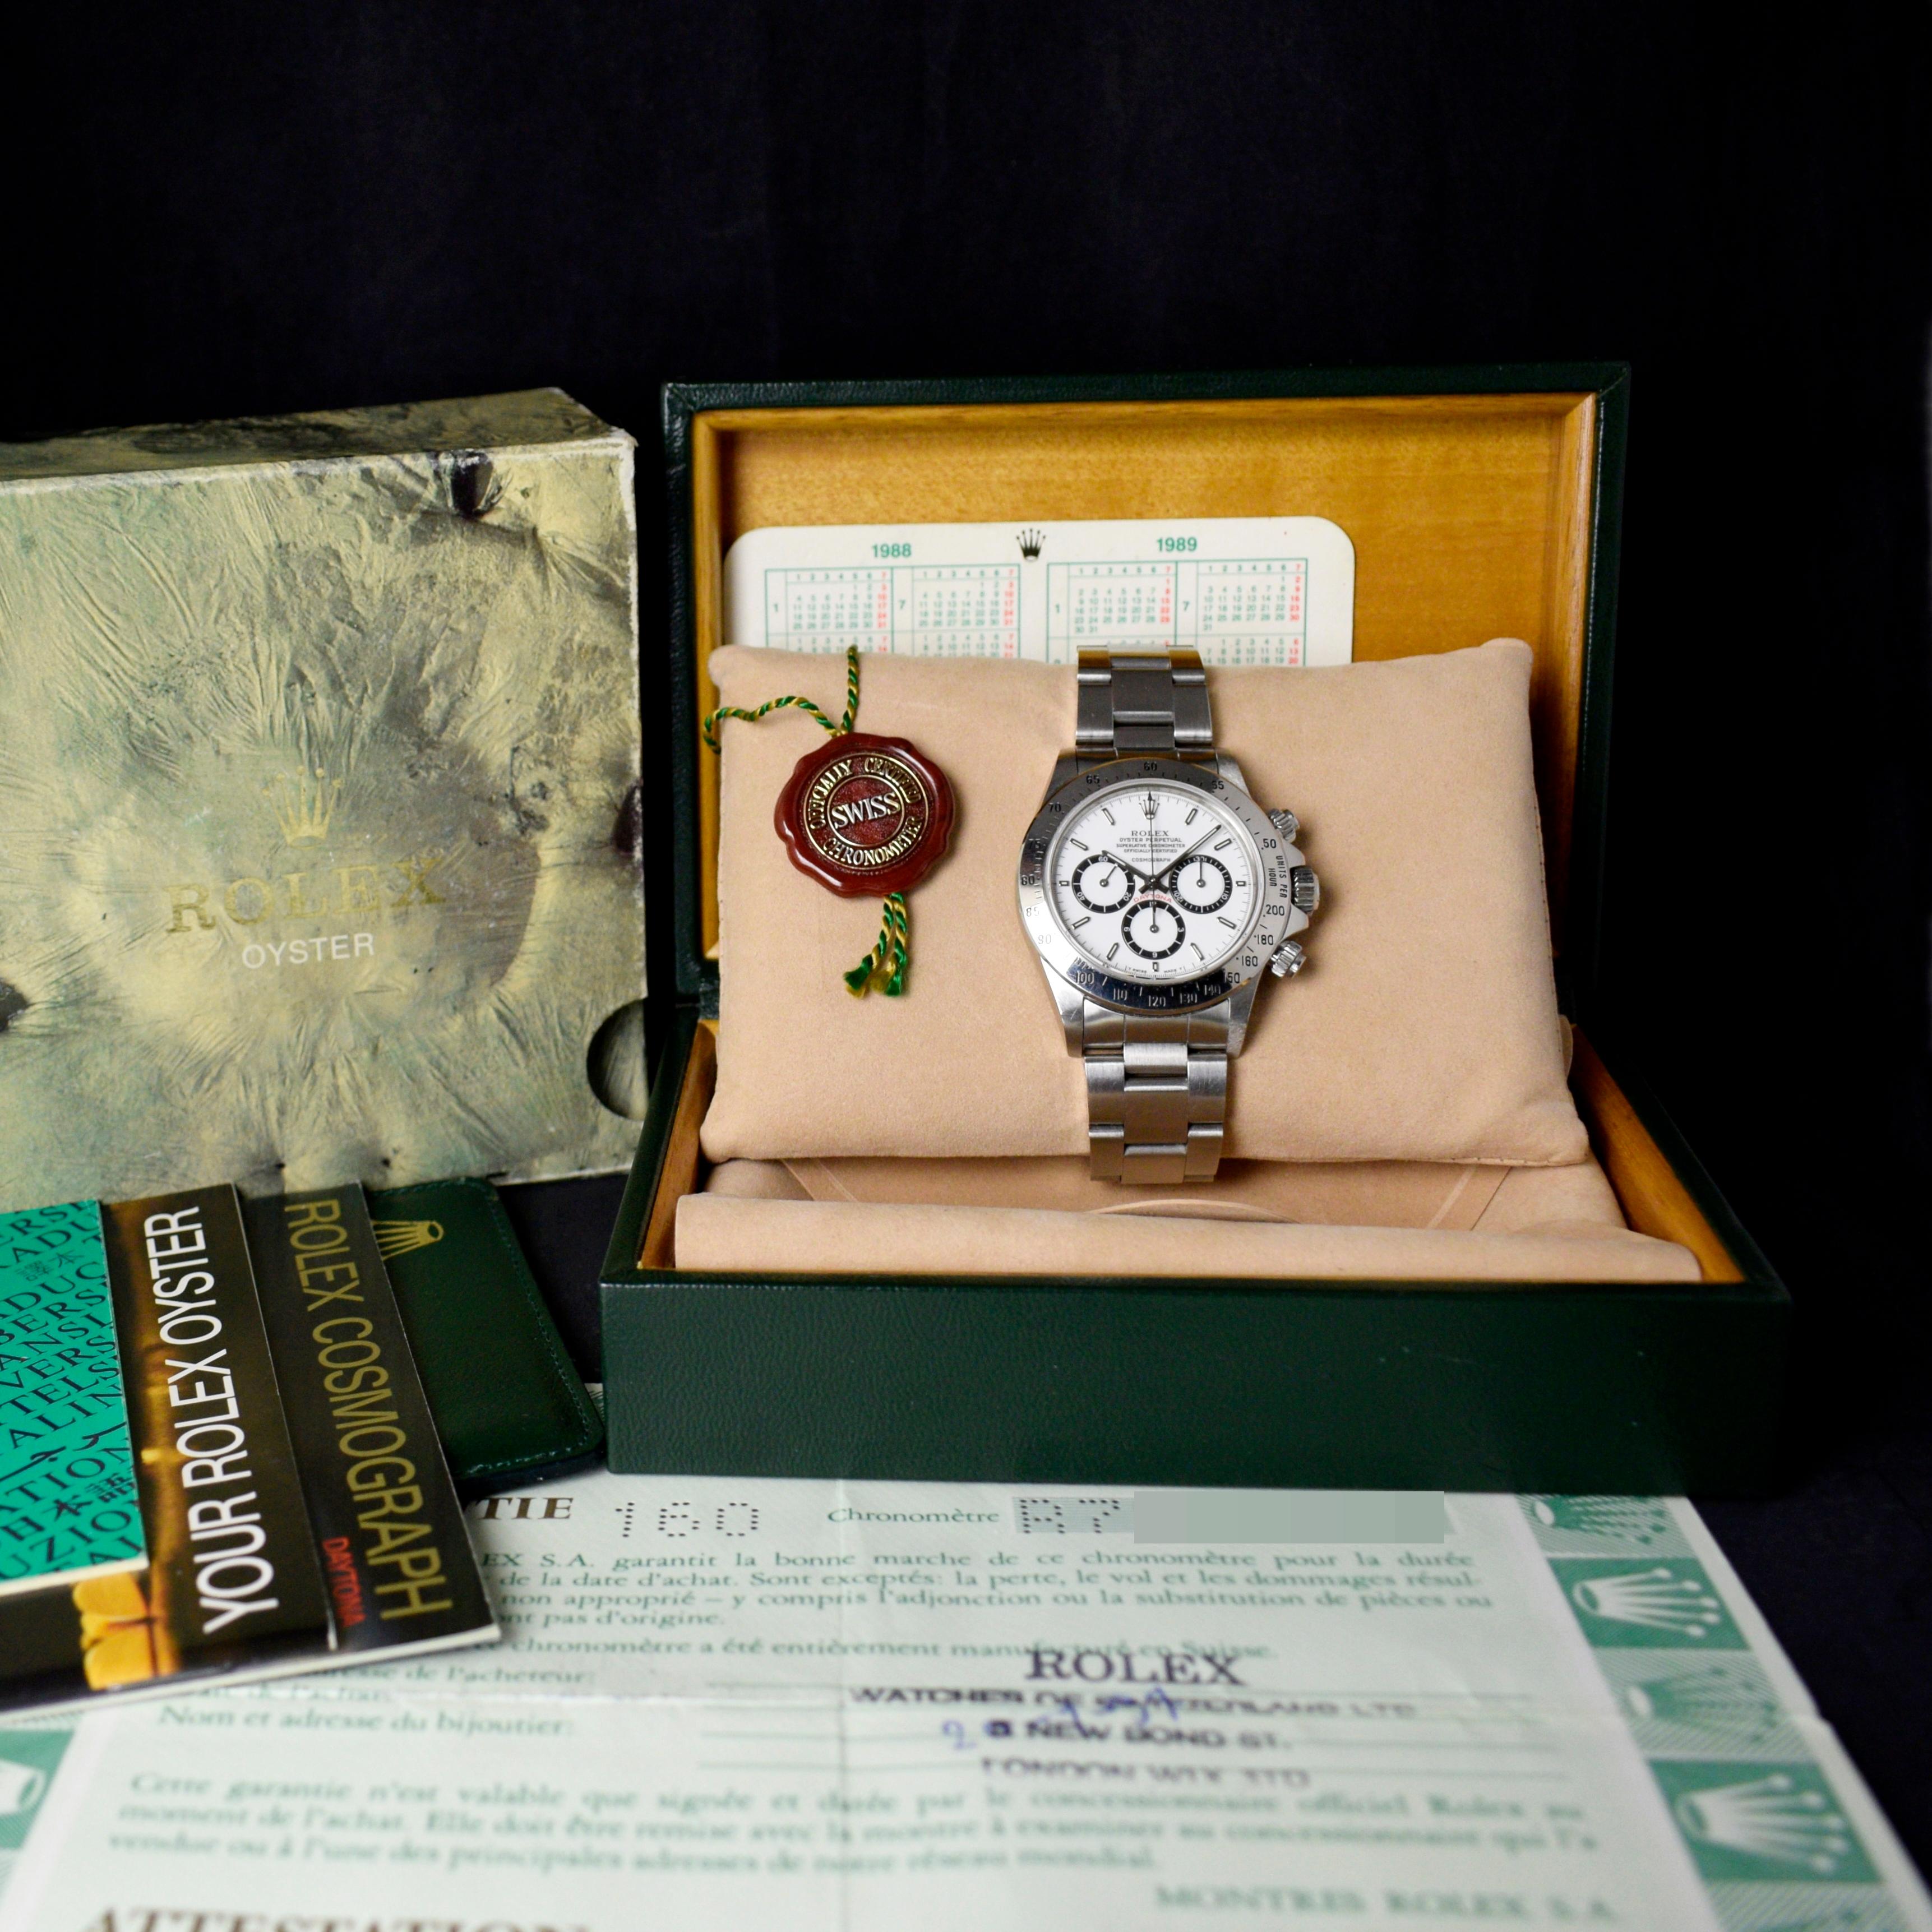 Brand: Rolex
Model: 16520
Year: 1988
Serial number: R7xxxxx
Reference: OT1674

Year 1988 was a benchmark year for Rolex launched the new line of Daytona Reference 16520. From a case size 38mm case with manually wind movement and plexi crystal to a